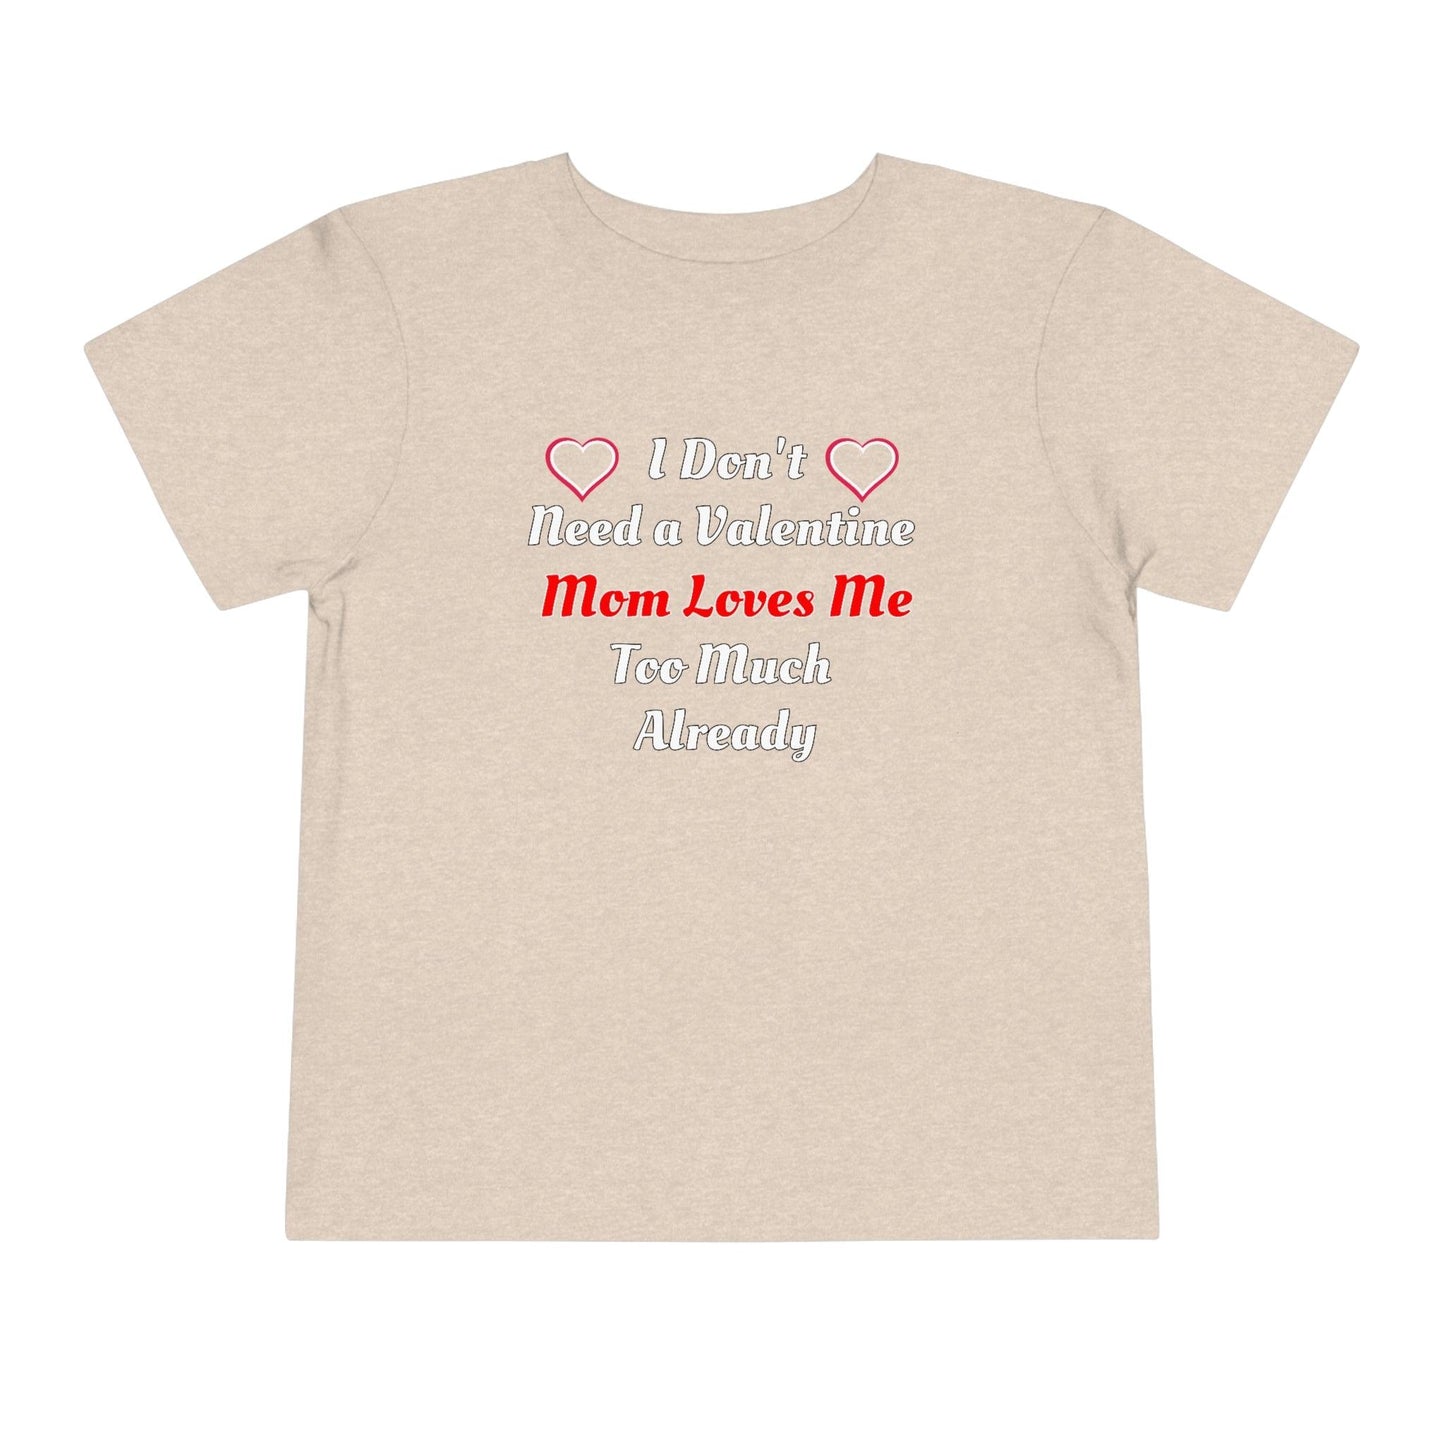 I don't need a valentine mom loves me too much already Toddler Tee - Giftsmojo